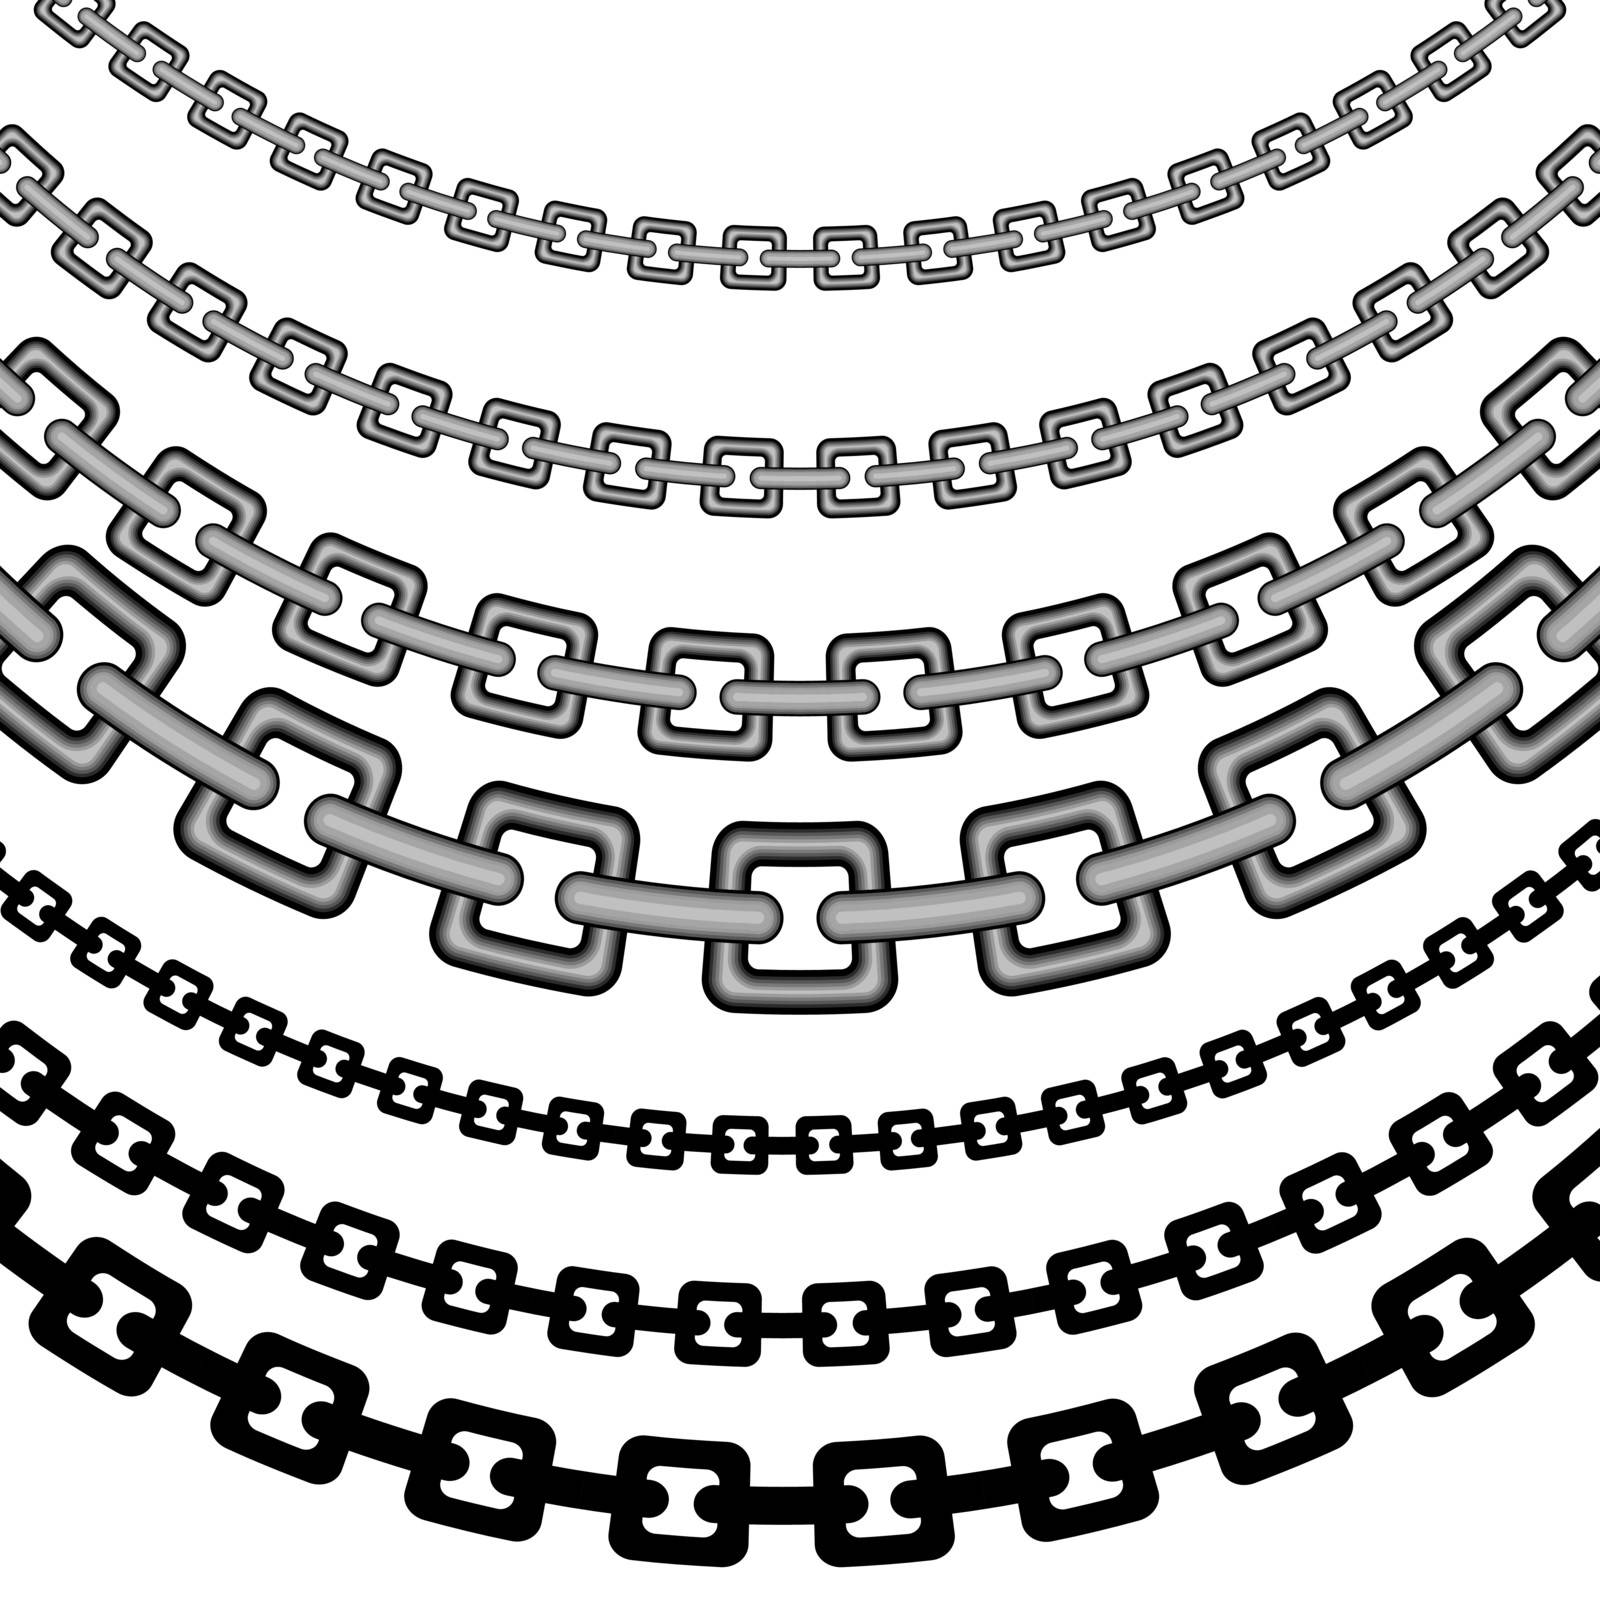 Curved Chain Pattern by cteconsulting